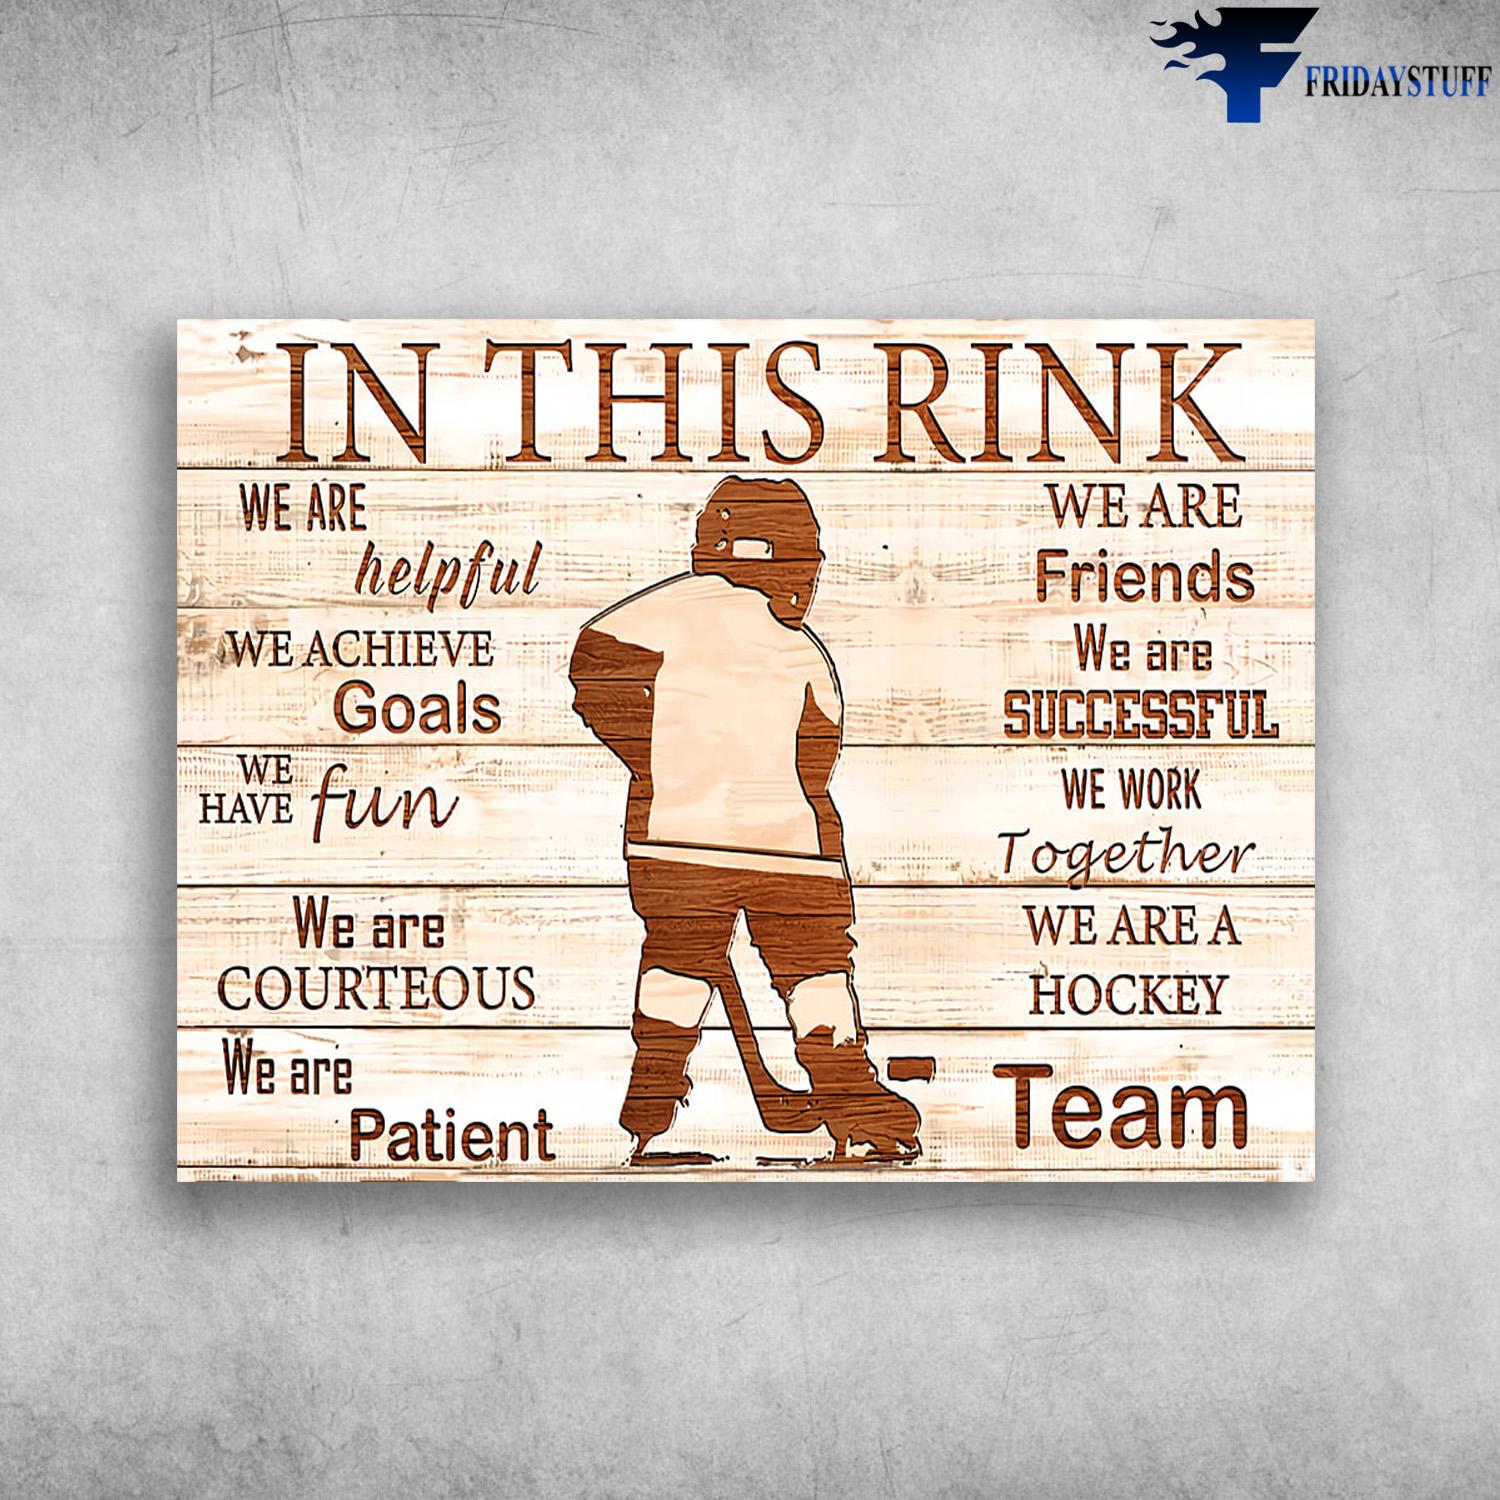 Ice Hockey, Hockey Boy, In This Rink, We Are Helpful, We Achieve Goals, We have Fun, We Are Courteous, We Are Patient, We Are Friends, We Are Successful